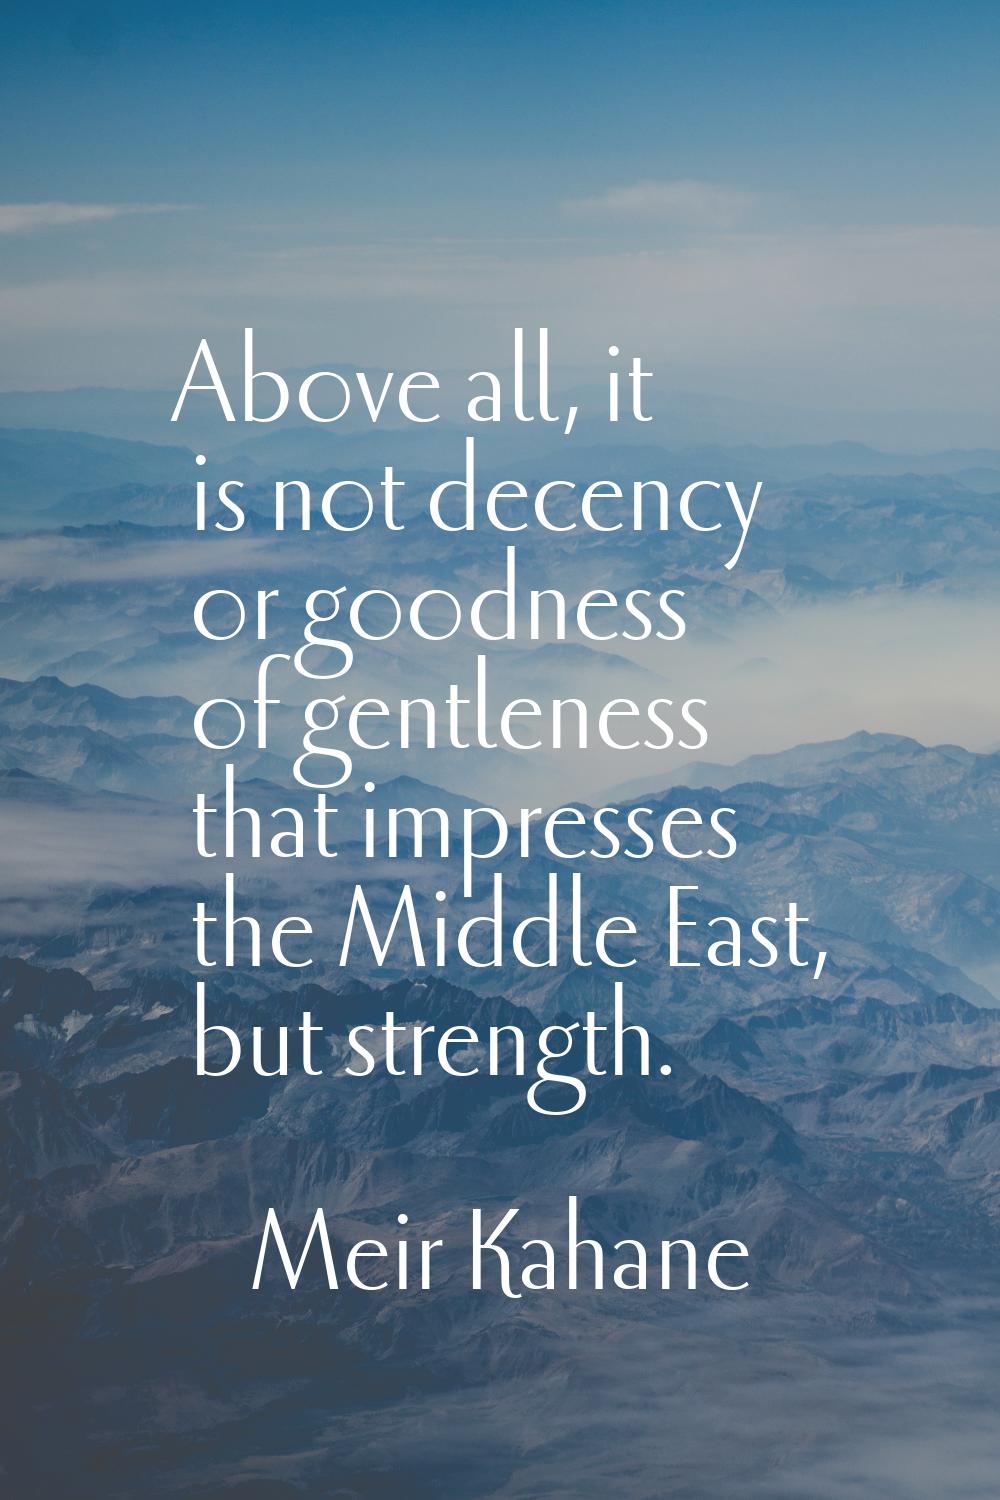 Above all, it is not decency or goodness of gentleness that impresses the Middle East, but strength